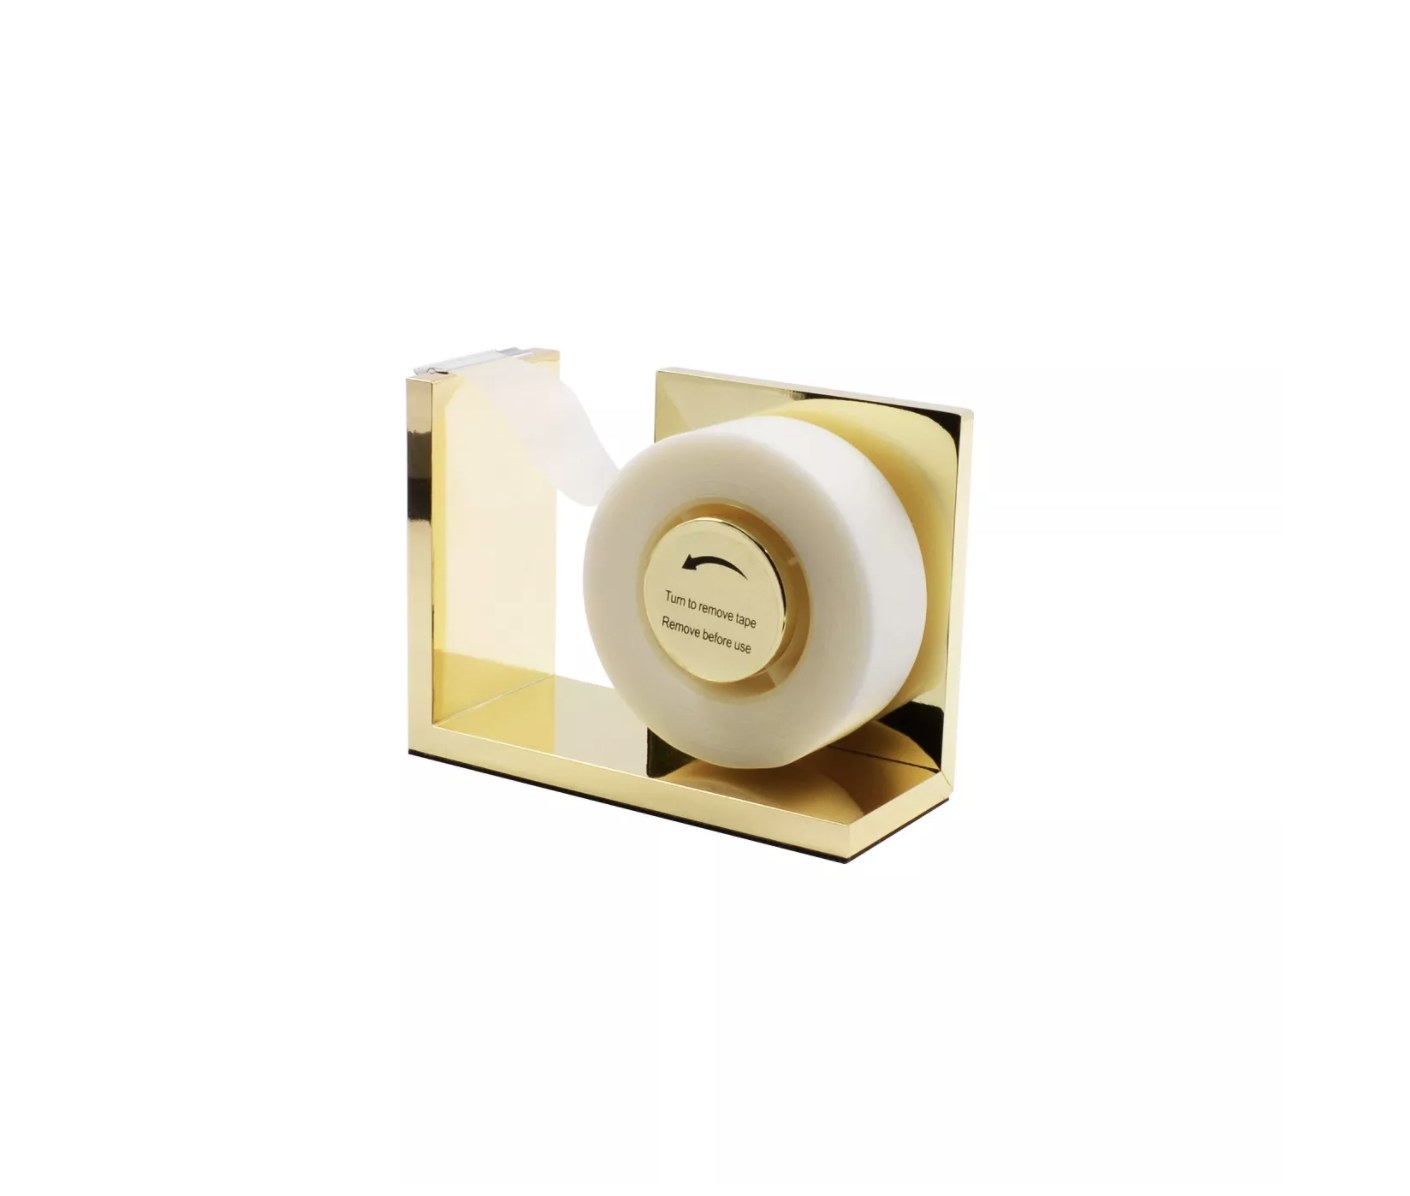 The shiny gold tape dispenser has &quot;Turn to remove tape&quot; and &quot;Remove before use&quot; on the center